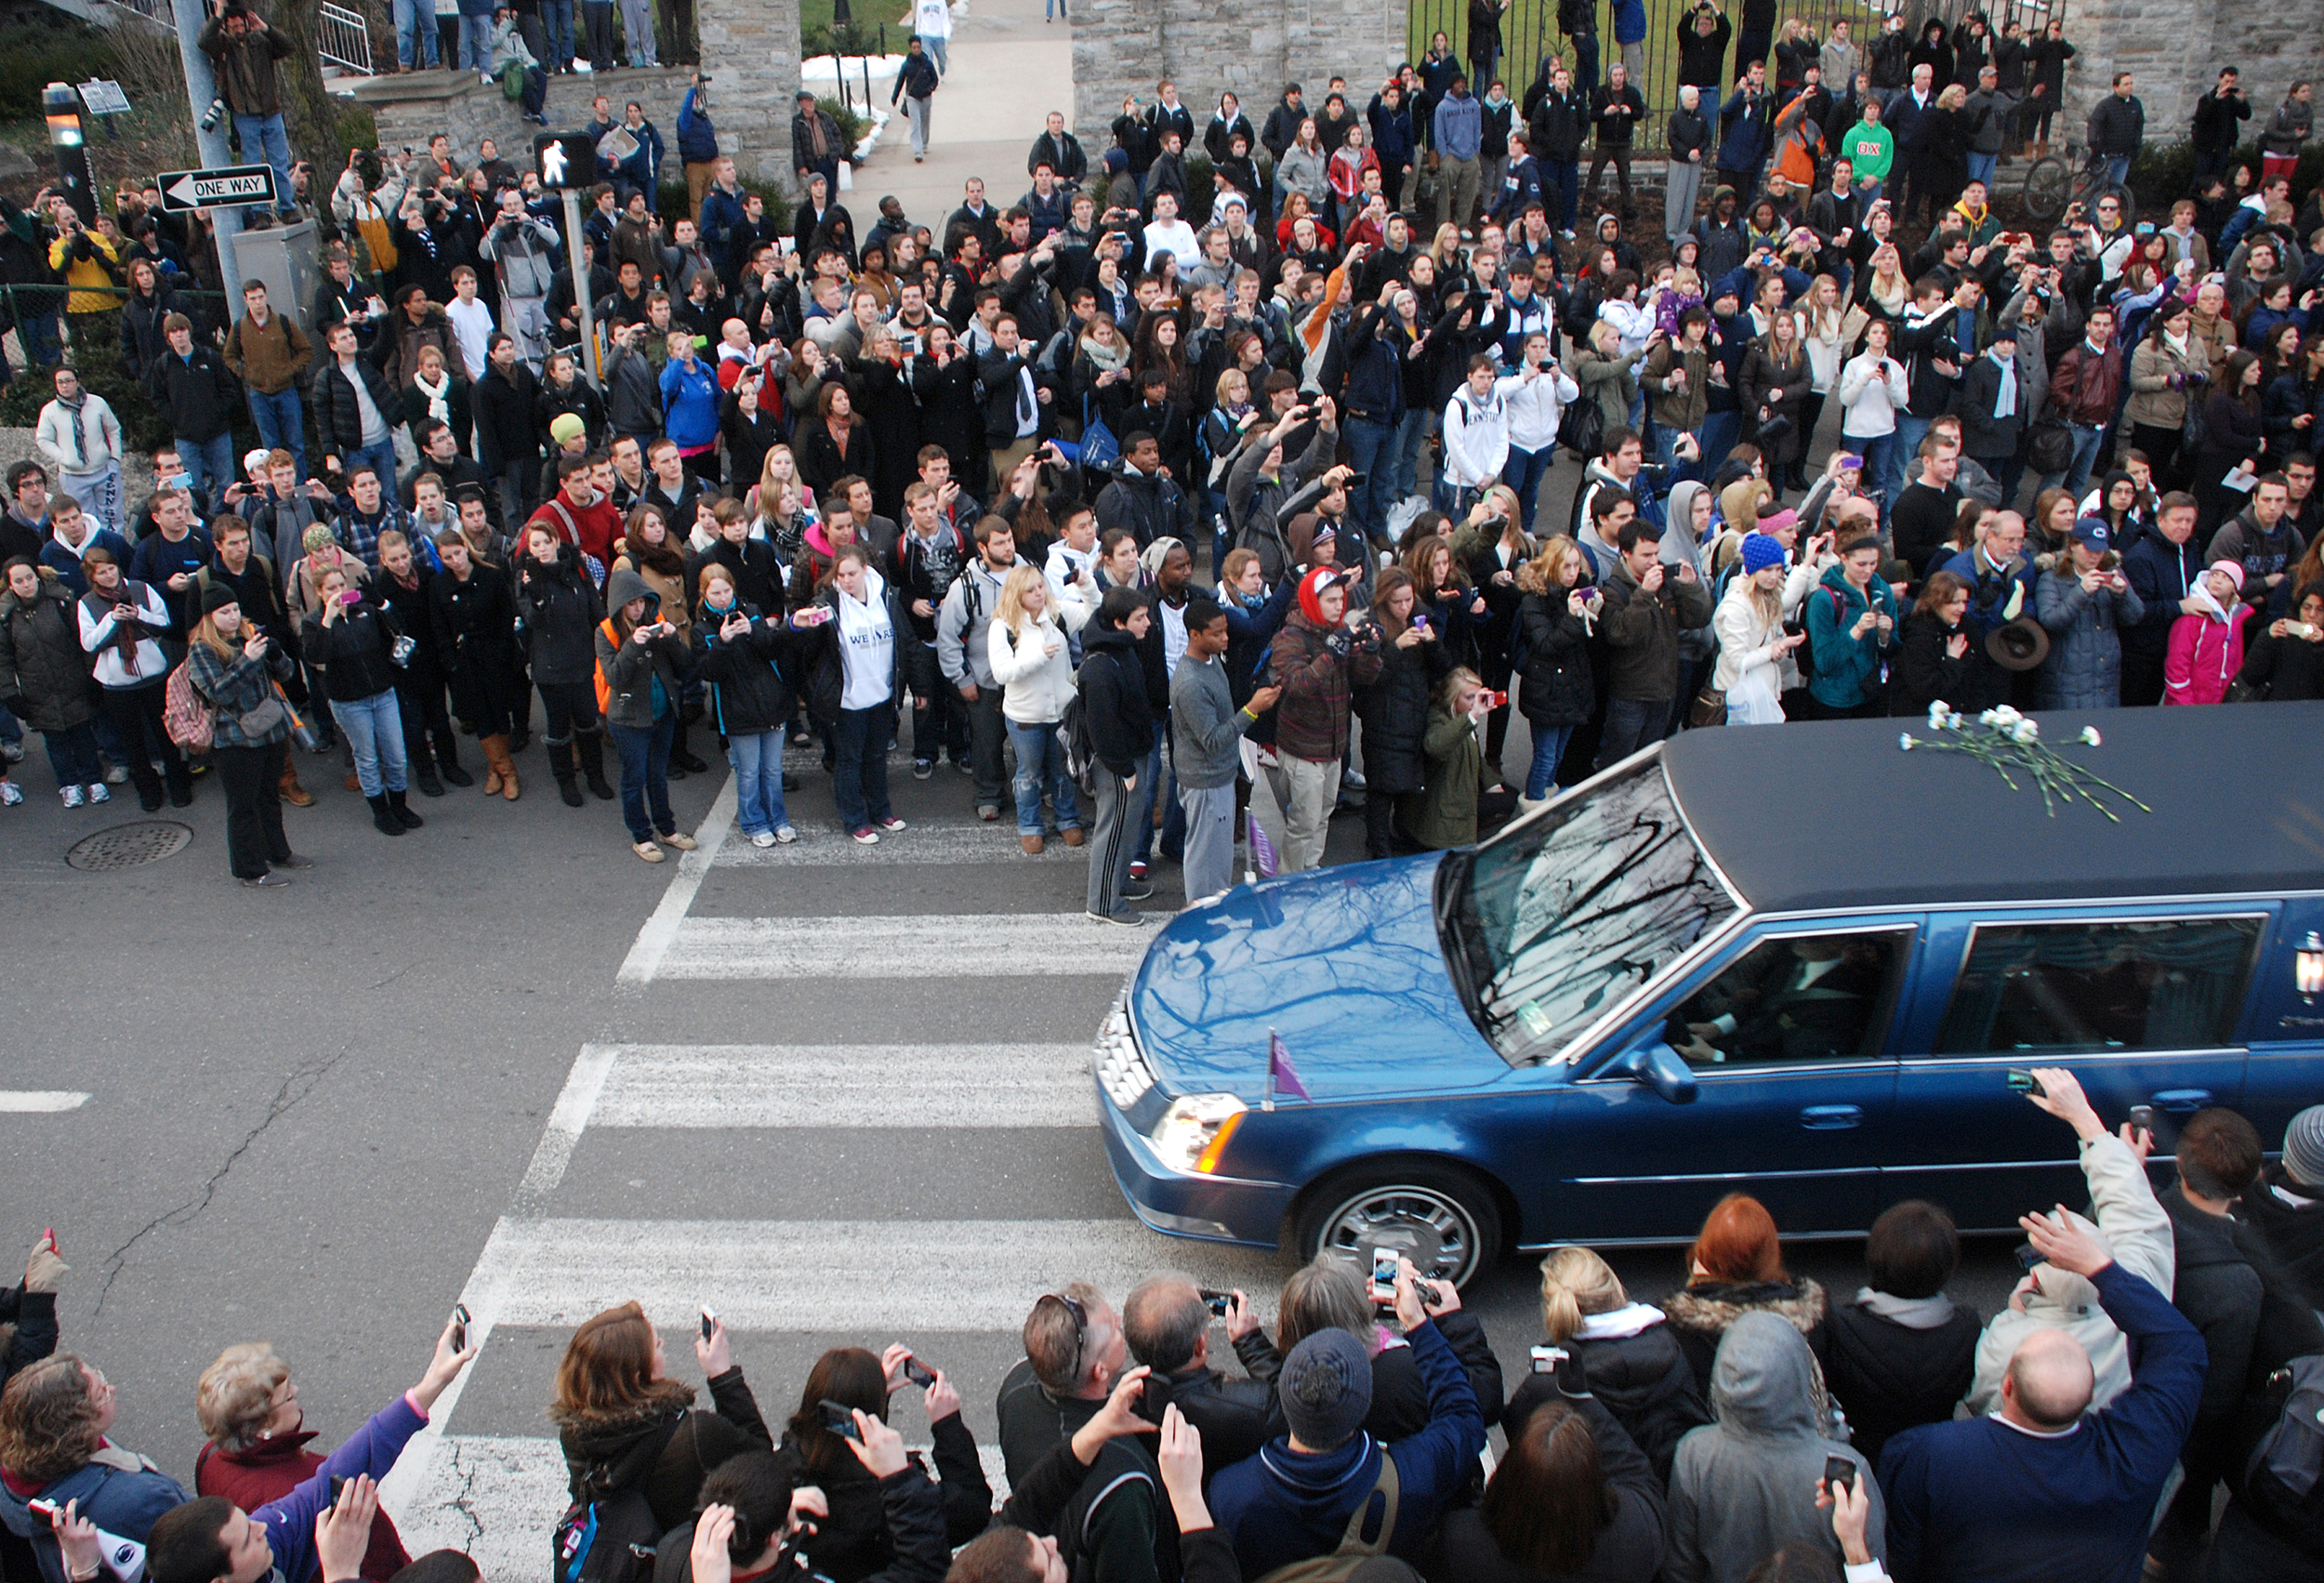  A hearse carrying the casket of Joe Paterno drives by the Allen Street gates on Wednesday, Jan. 25, 2011 during the funeral procession from the Pasquerilla Spiritual Center to a private burial. 